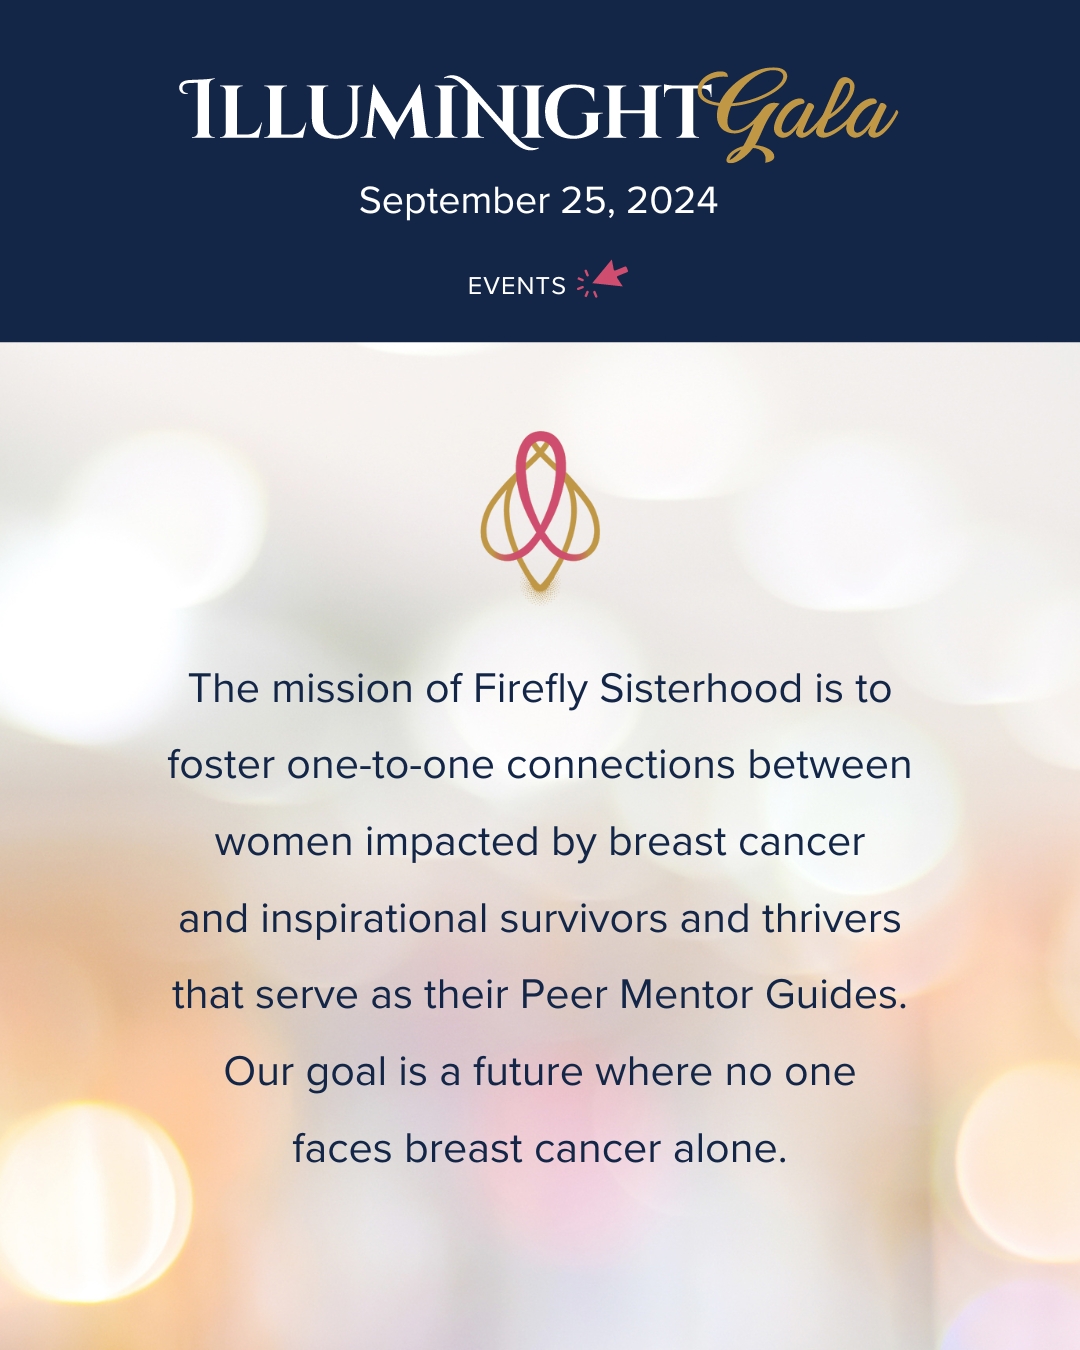 The mission of Firefly Sisterhood is to foster one-to-one connections between women impacted by breast cancer and inspirational survivors and thrivers that serve as their Peer Mentor Guides.